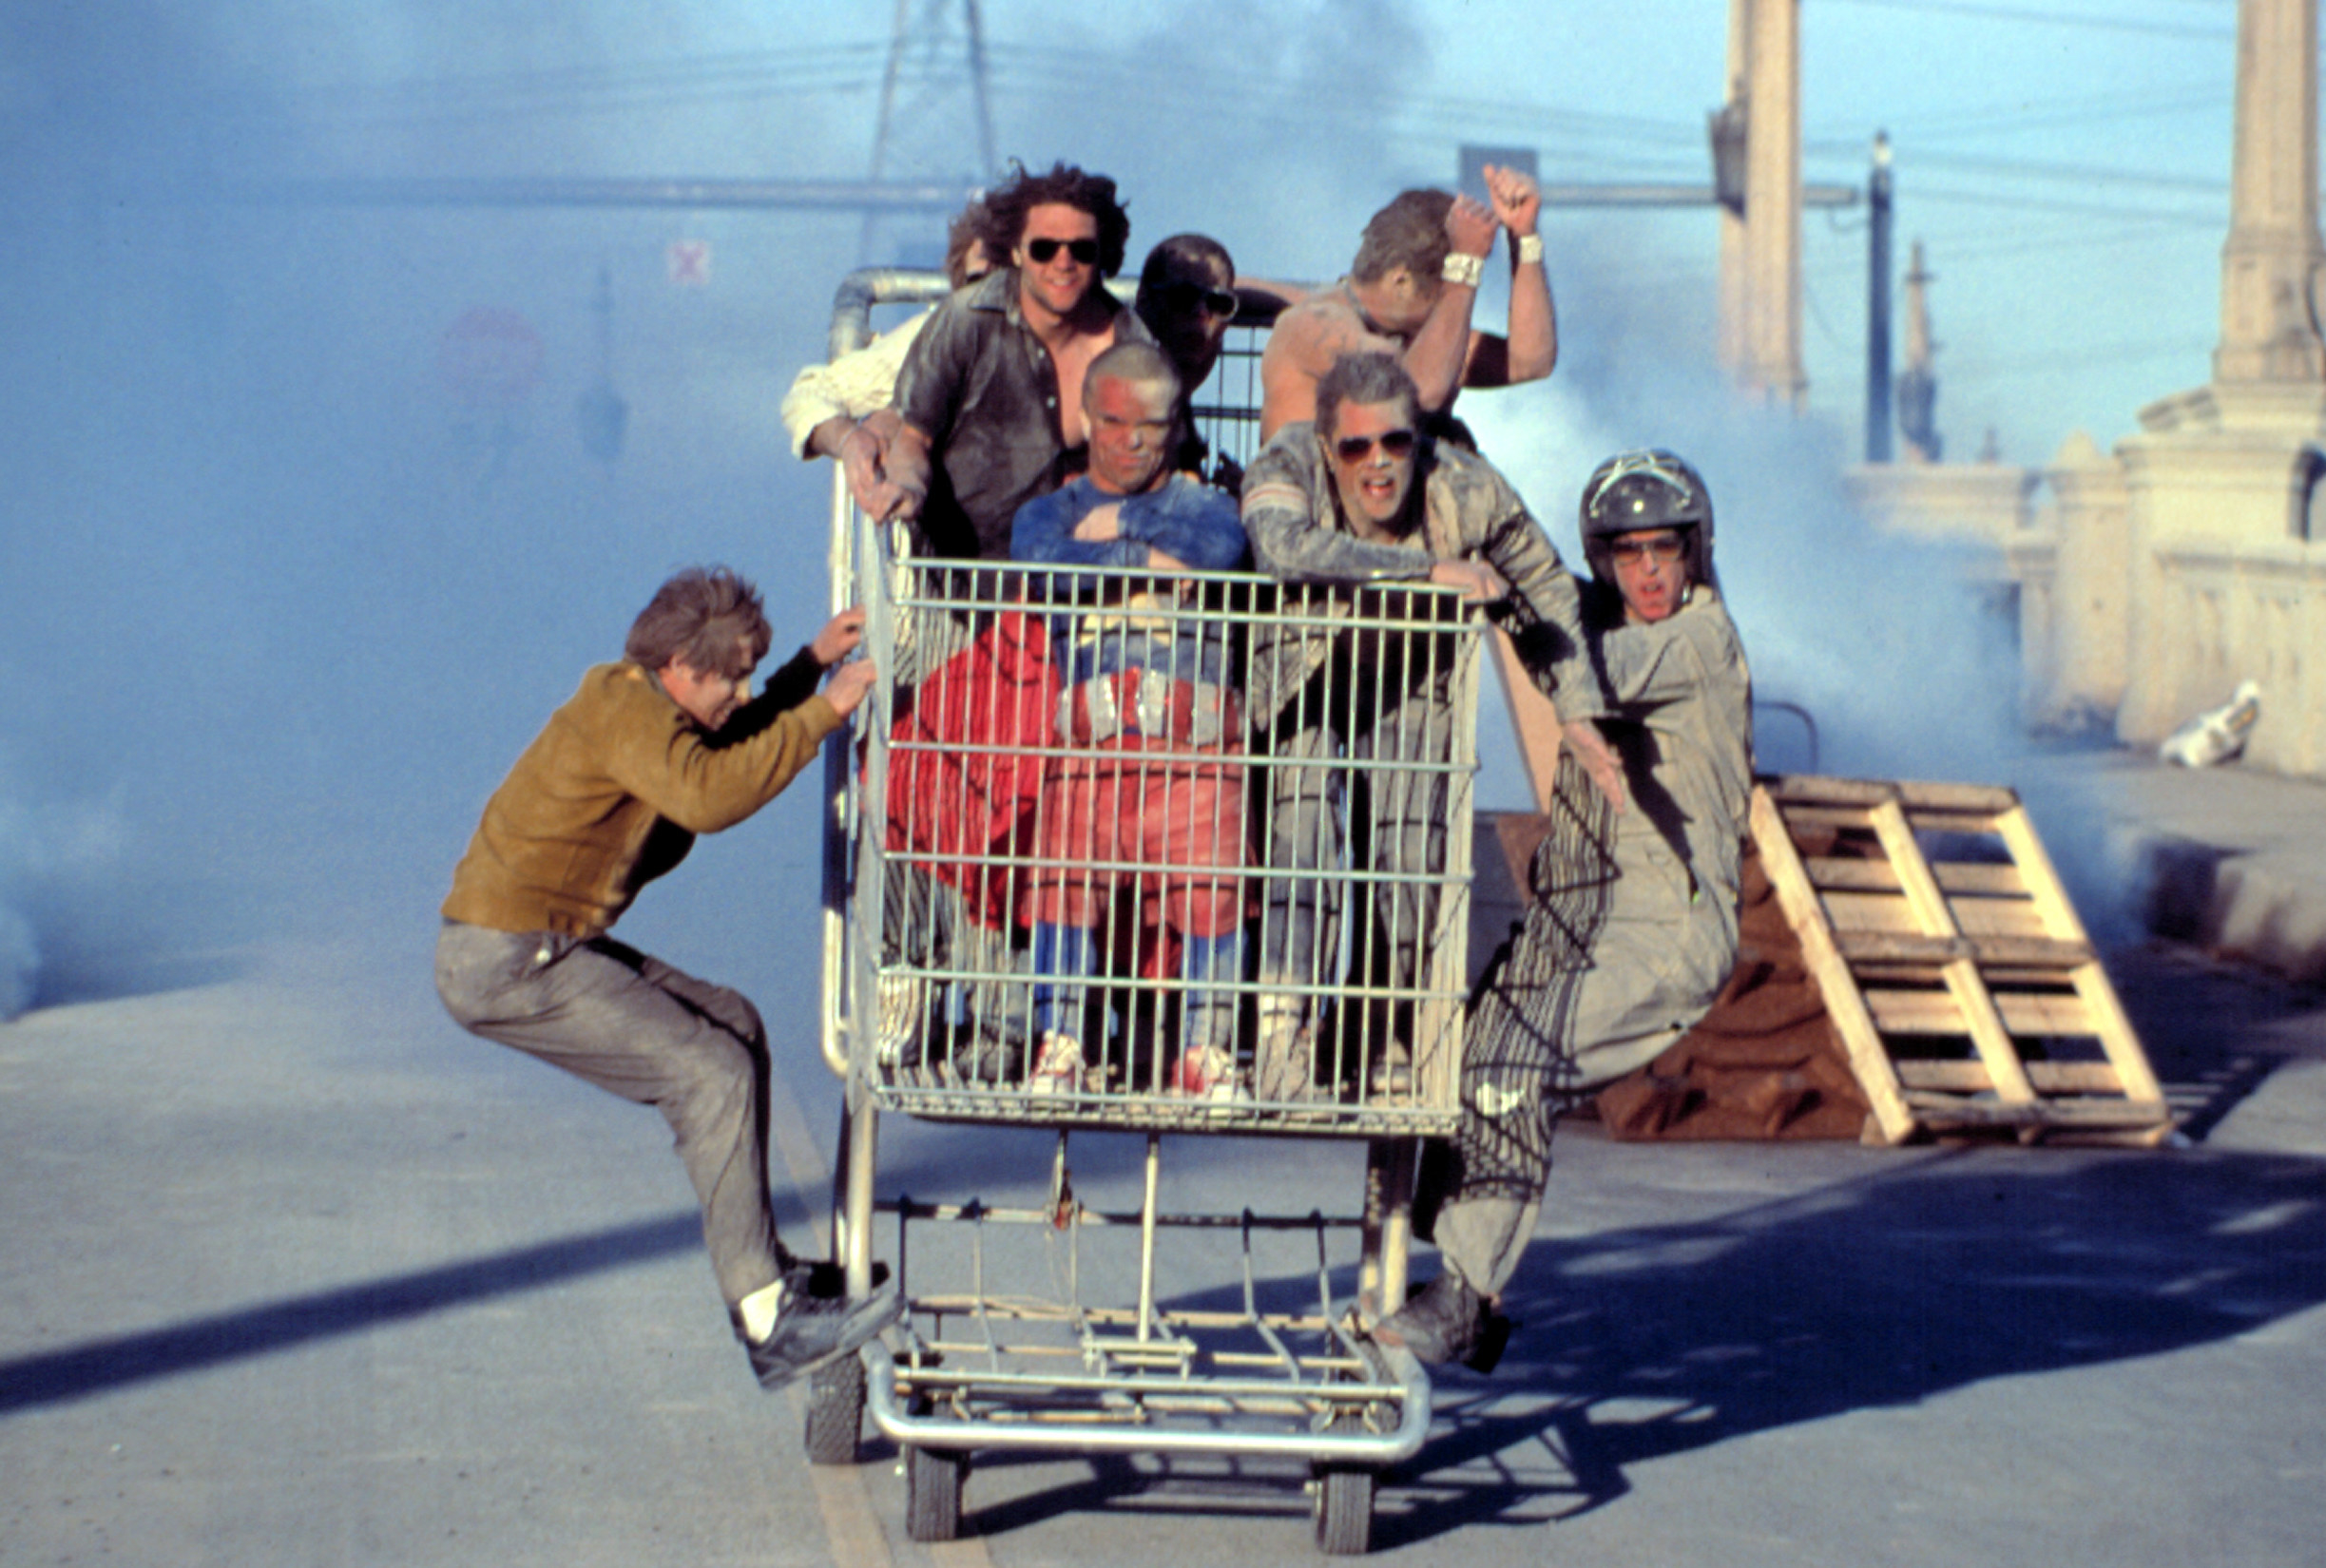 The cast of Jackass in a giant shopping cart